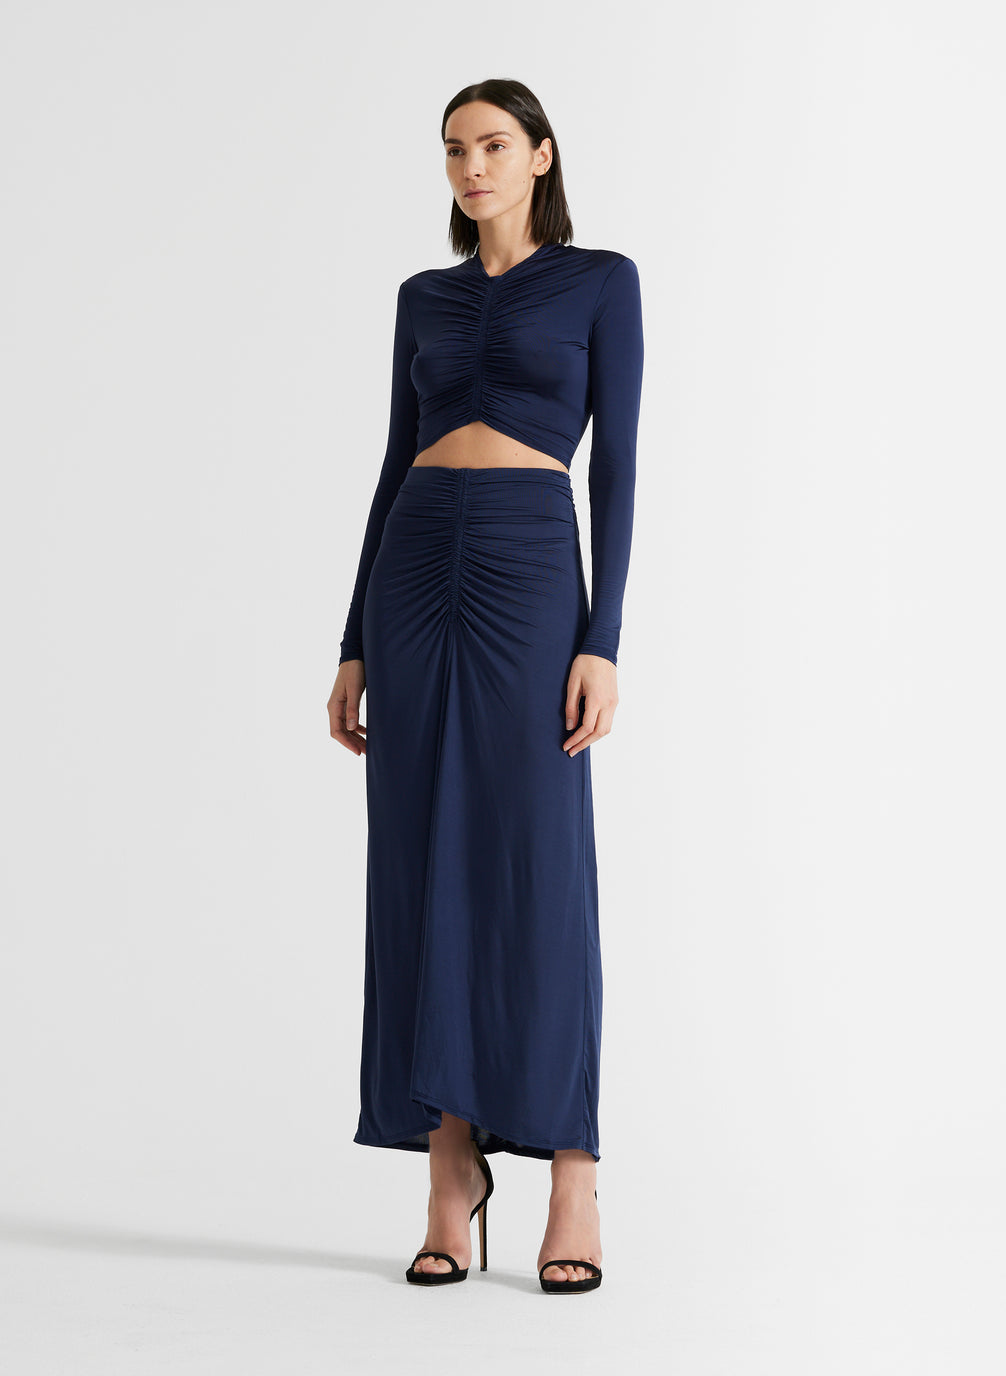 side view of woman wearing navy blue ruched long sleeve crop top and matching navy blue skirt